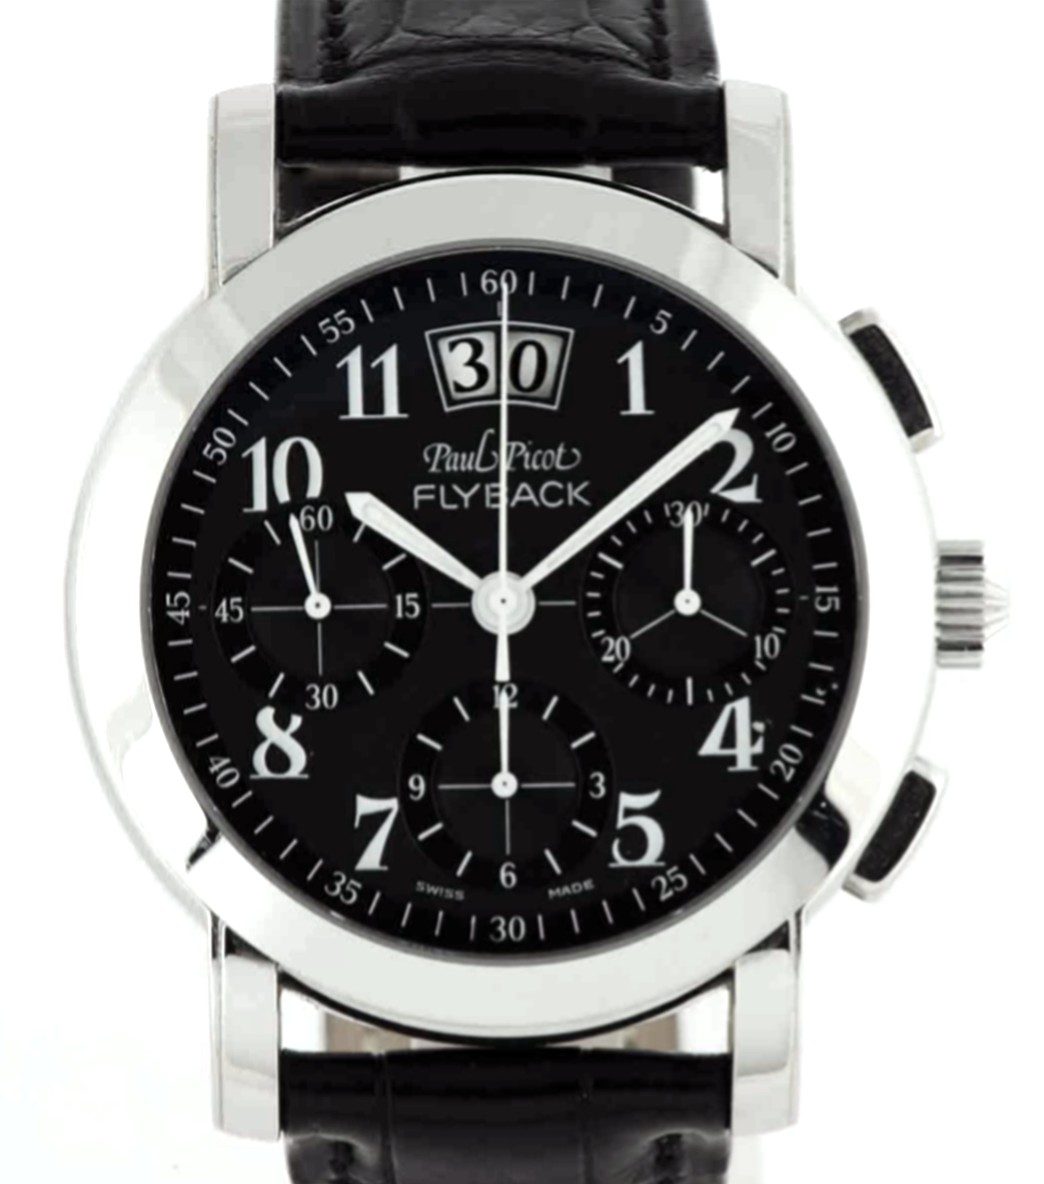 PAUL PICOT FLYBACK CHRONOGRAPH